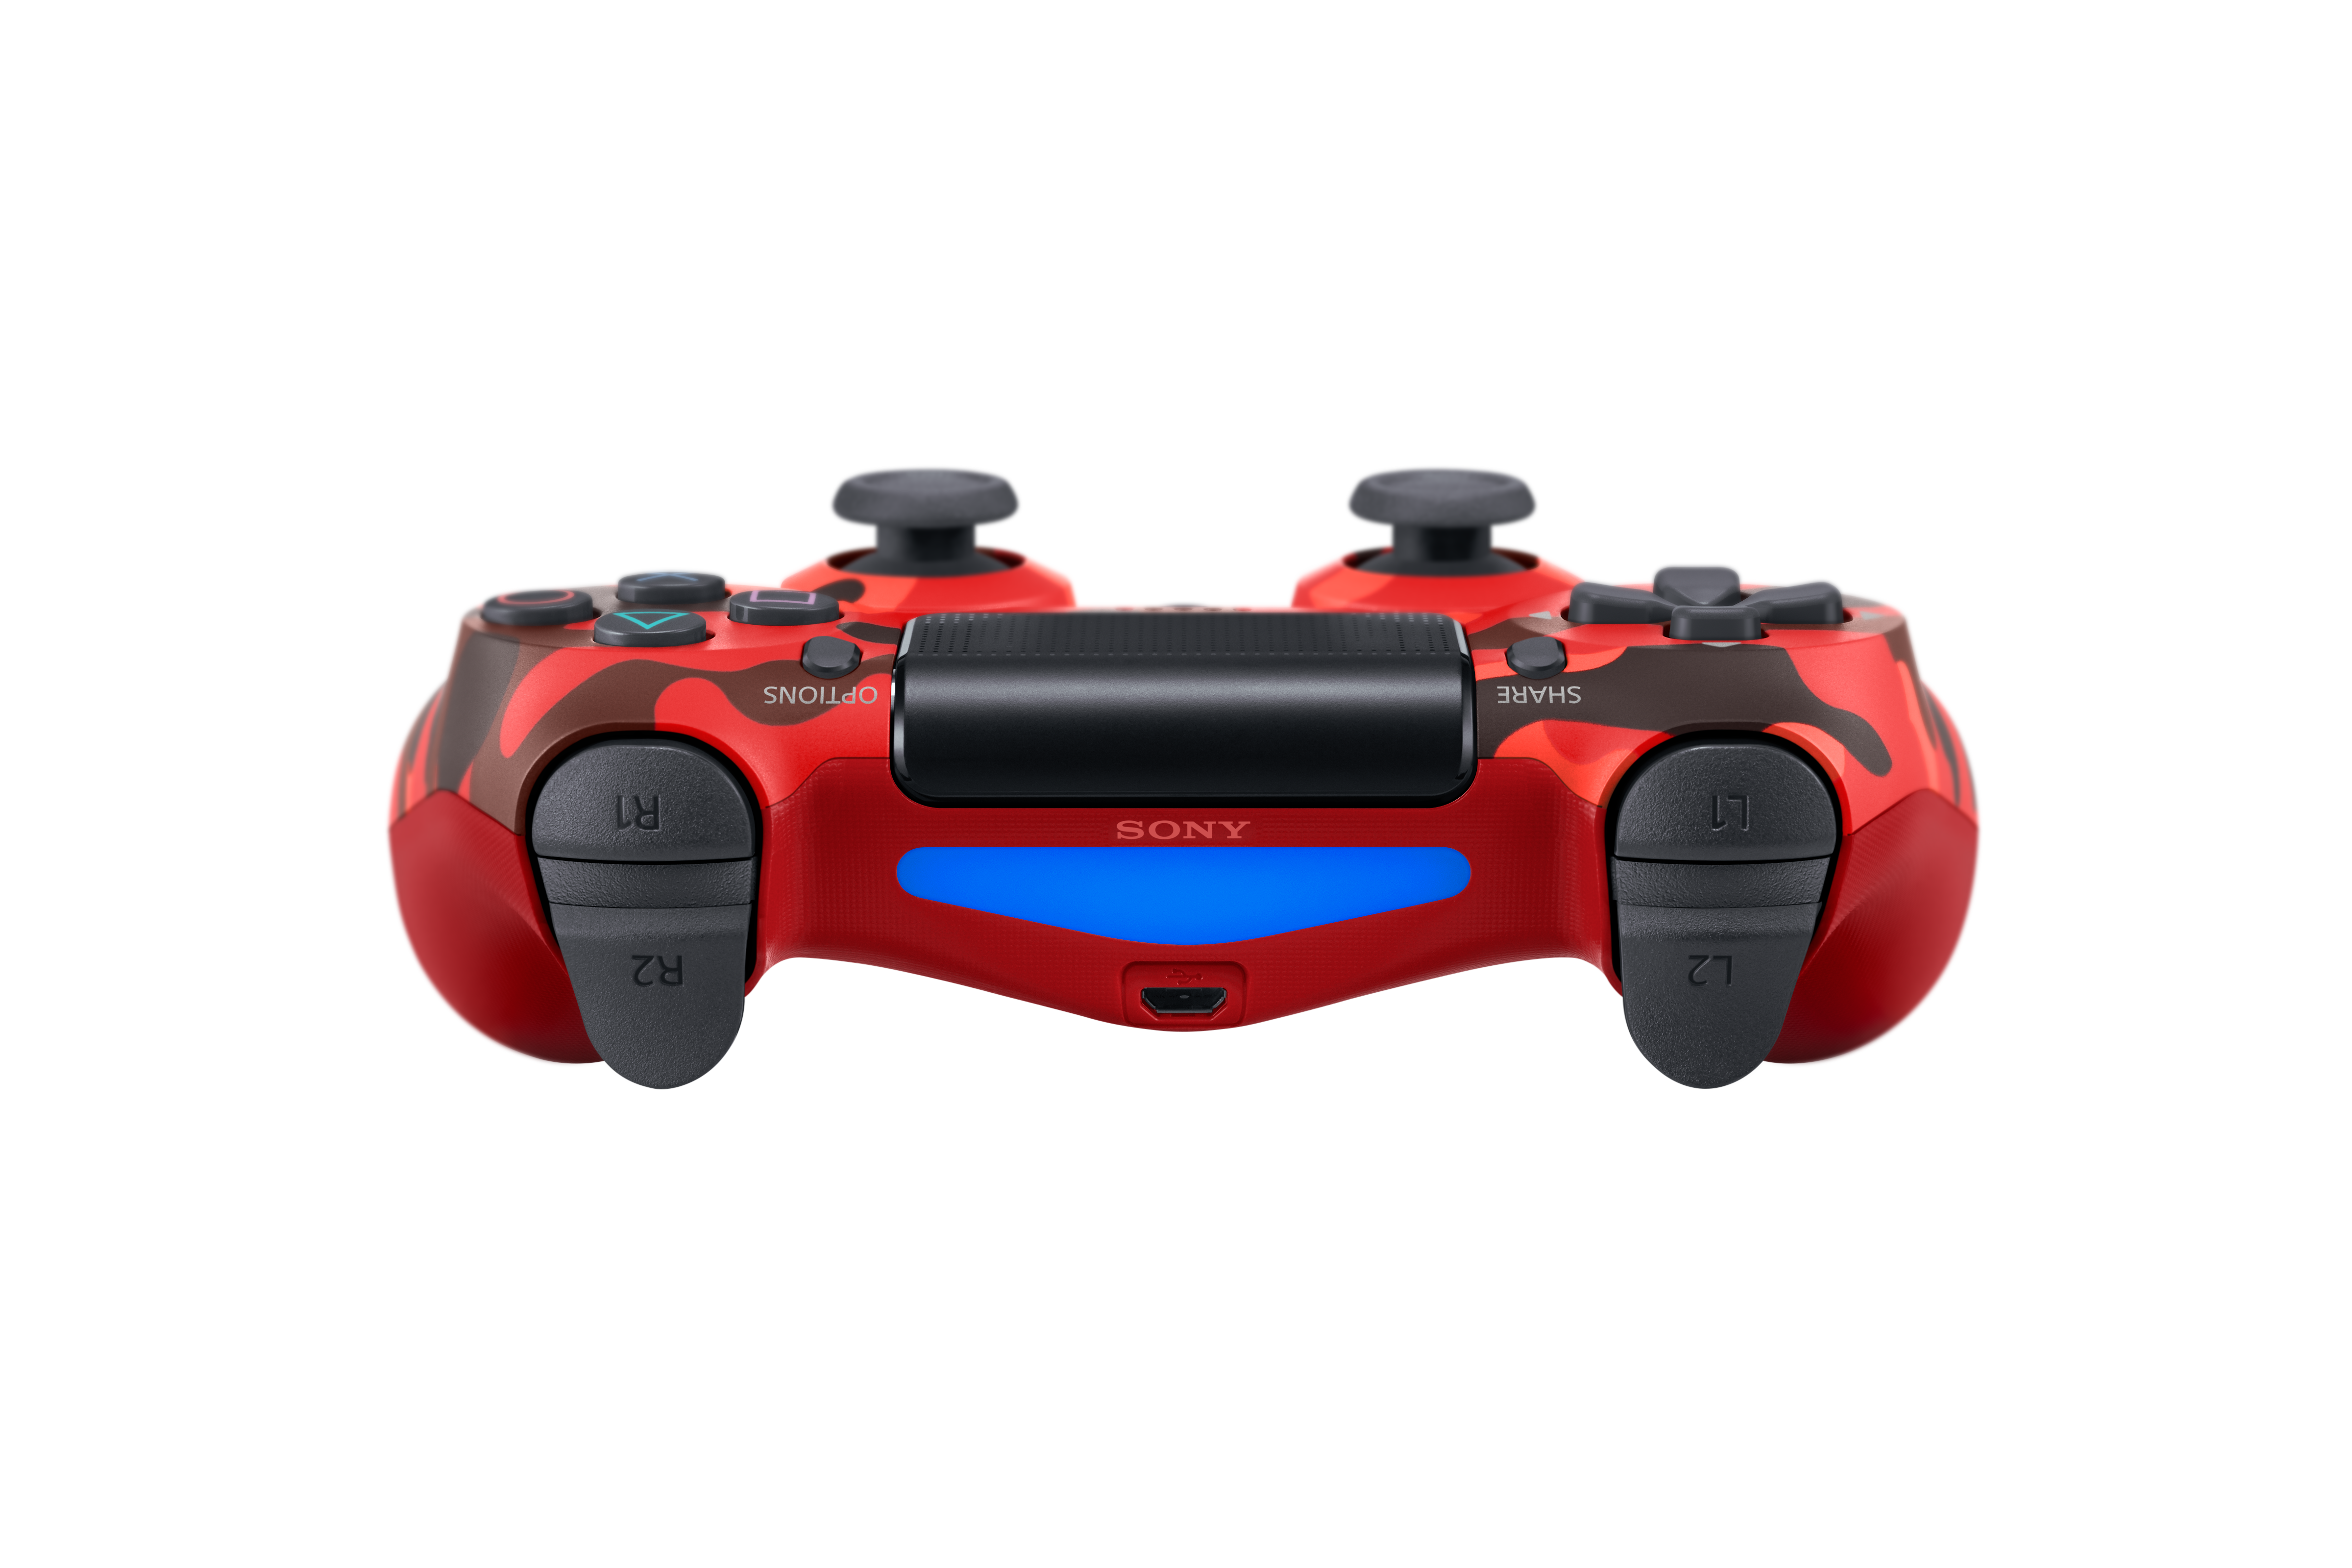 ps4 dualshock controller red